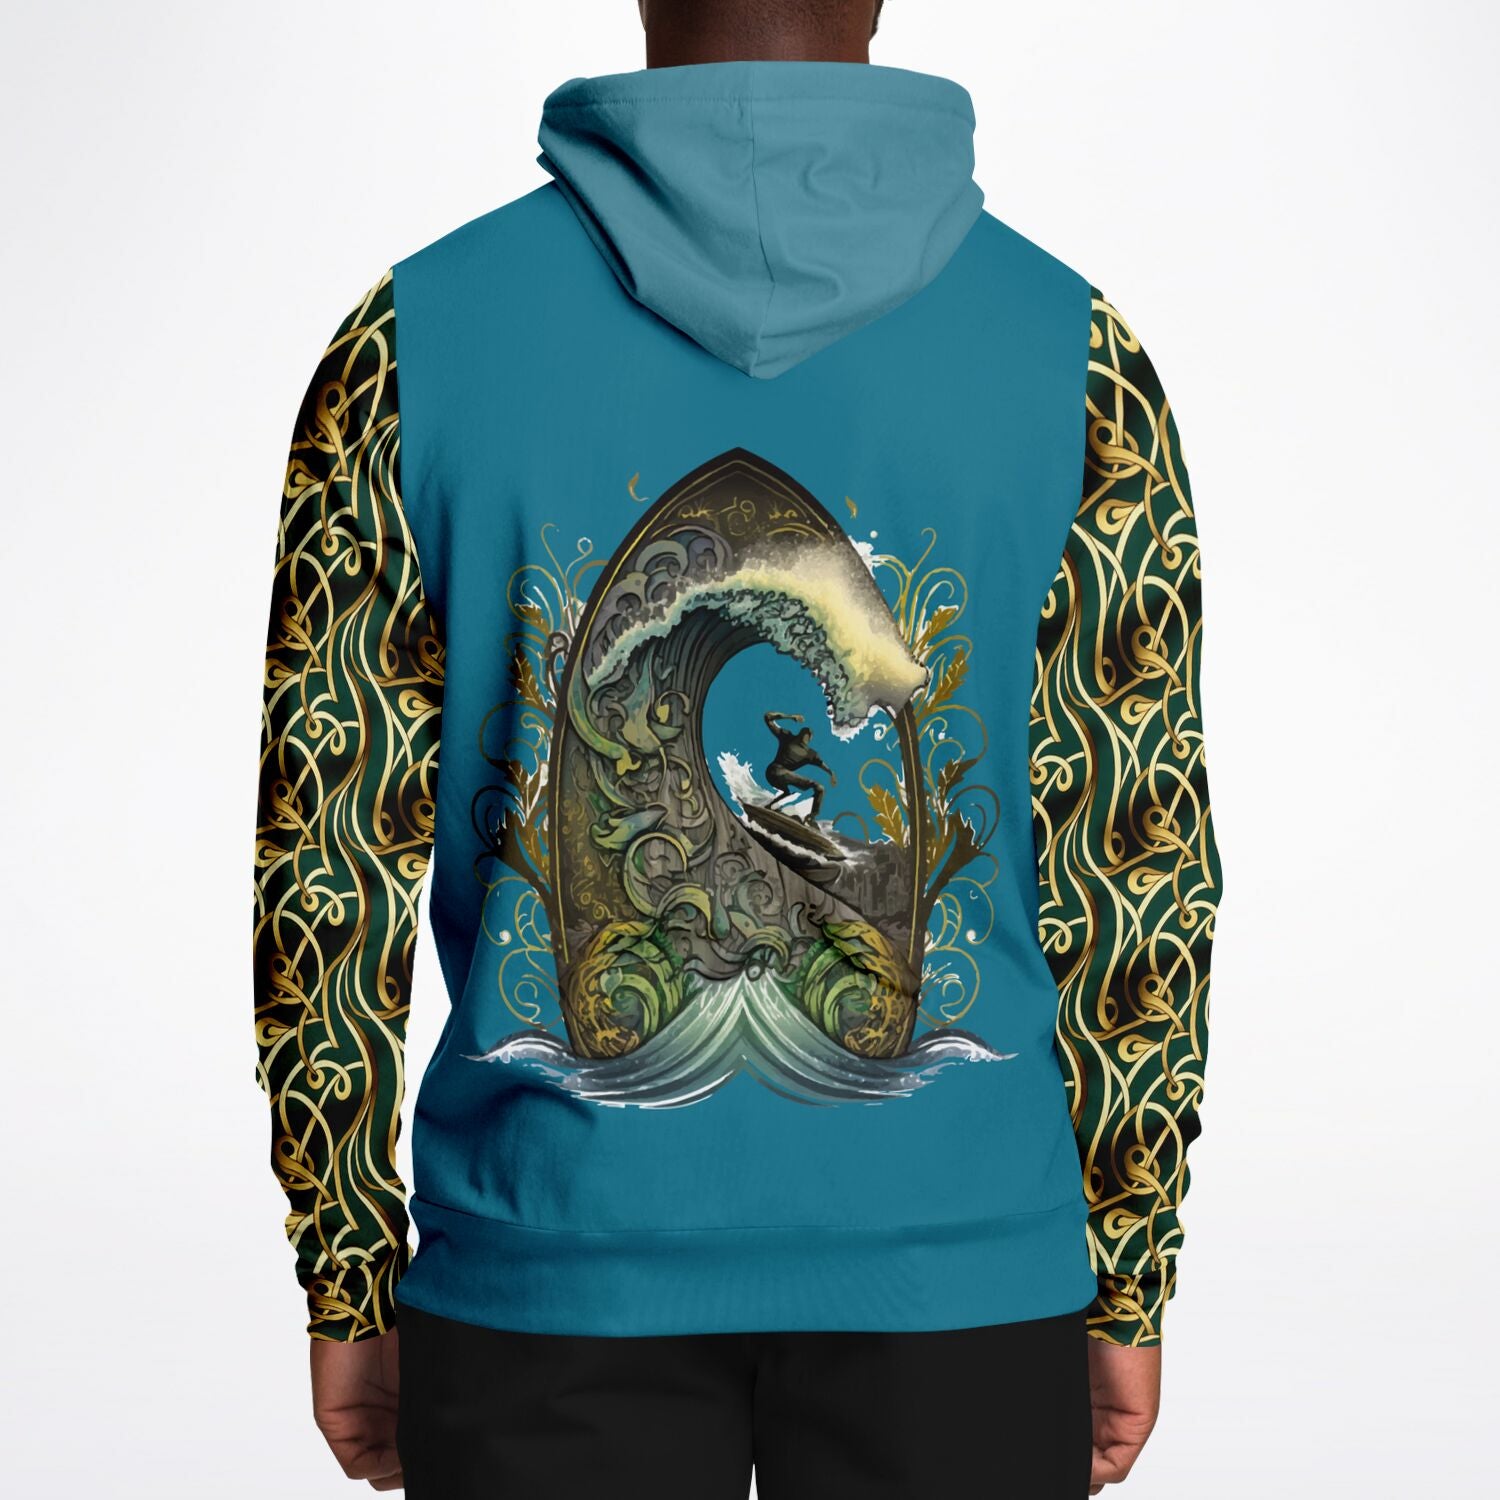 Celtic Surf Hoodie with Surfer Graphic - Catch Waves in Style